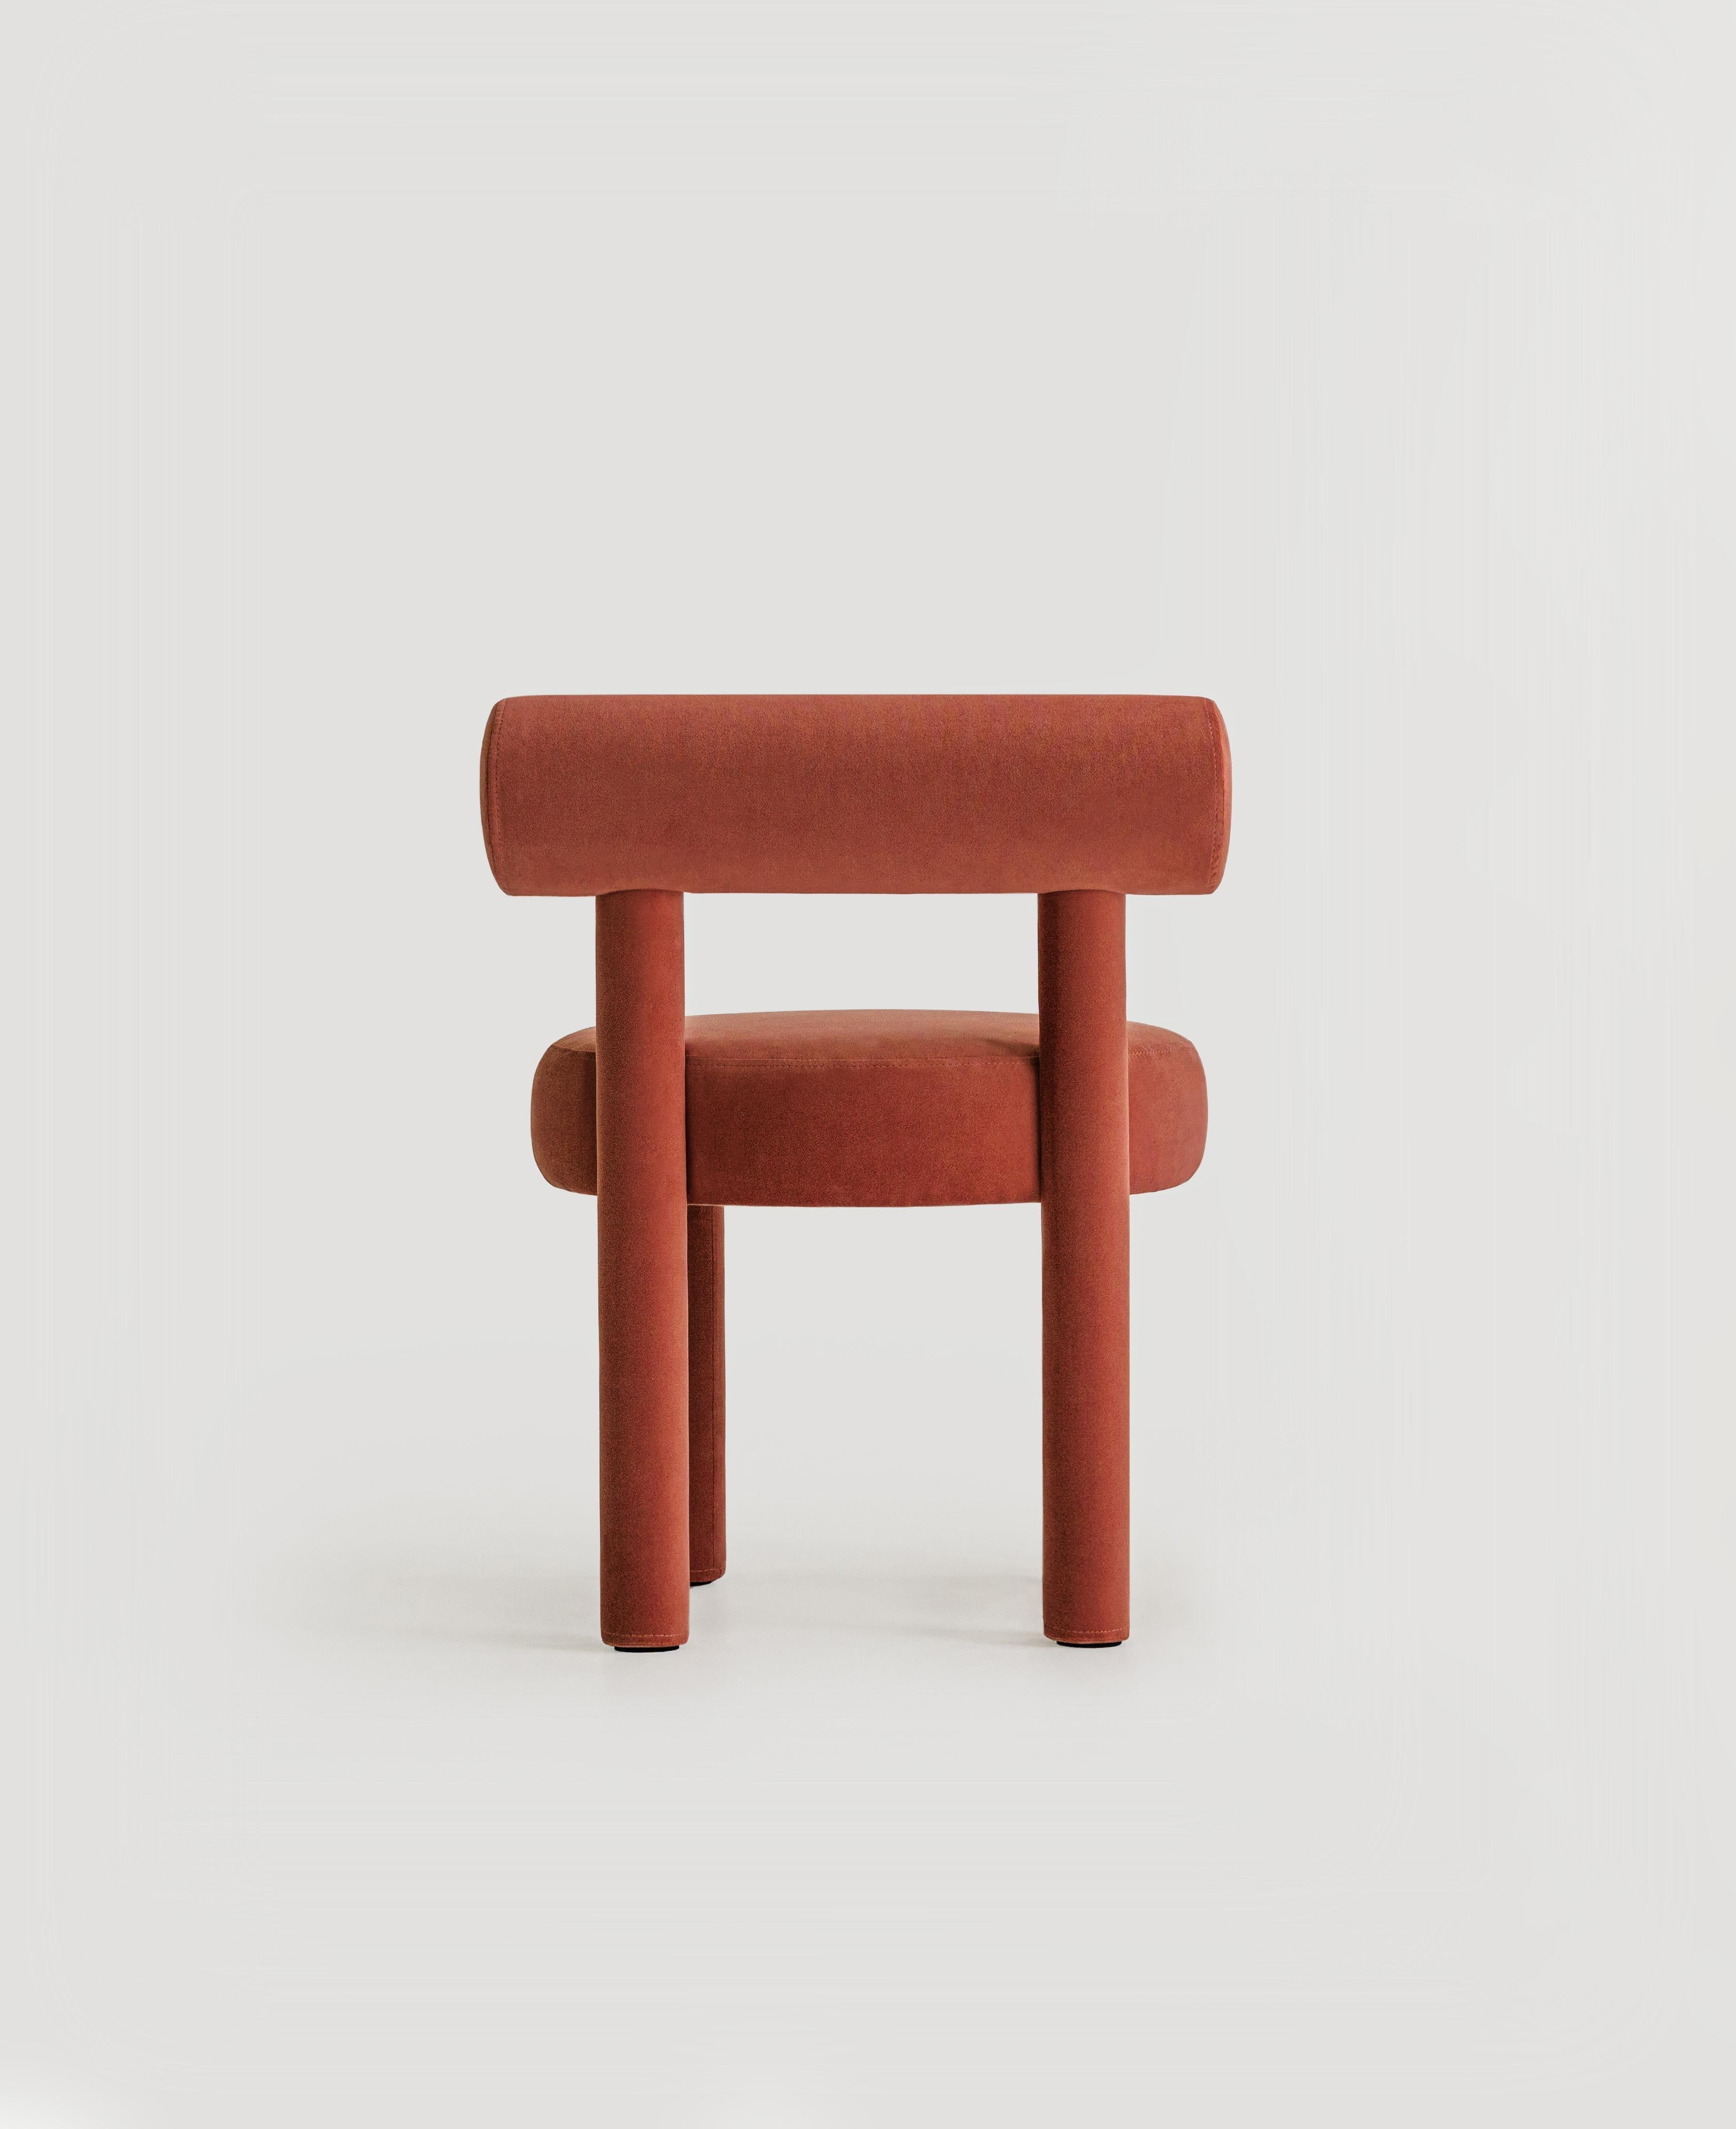 Chair Gropius CS1
Designer: Kateryna Sokolova for Noom

Dimensions:
Height: 74 cm / 29,13 in
Width: 57 cm / 22,44 in
Depth: 57 cm / 22,44 in
Seat height: 47 cm / 18,11 in

New NOOM furniture collection is dedicated to the 100th anniversary of the